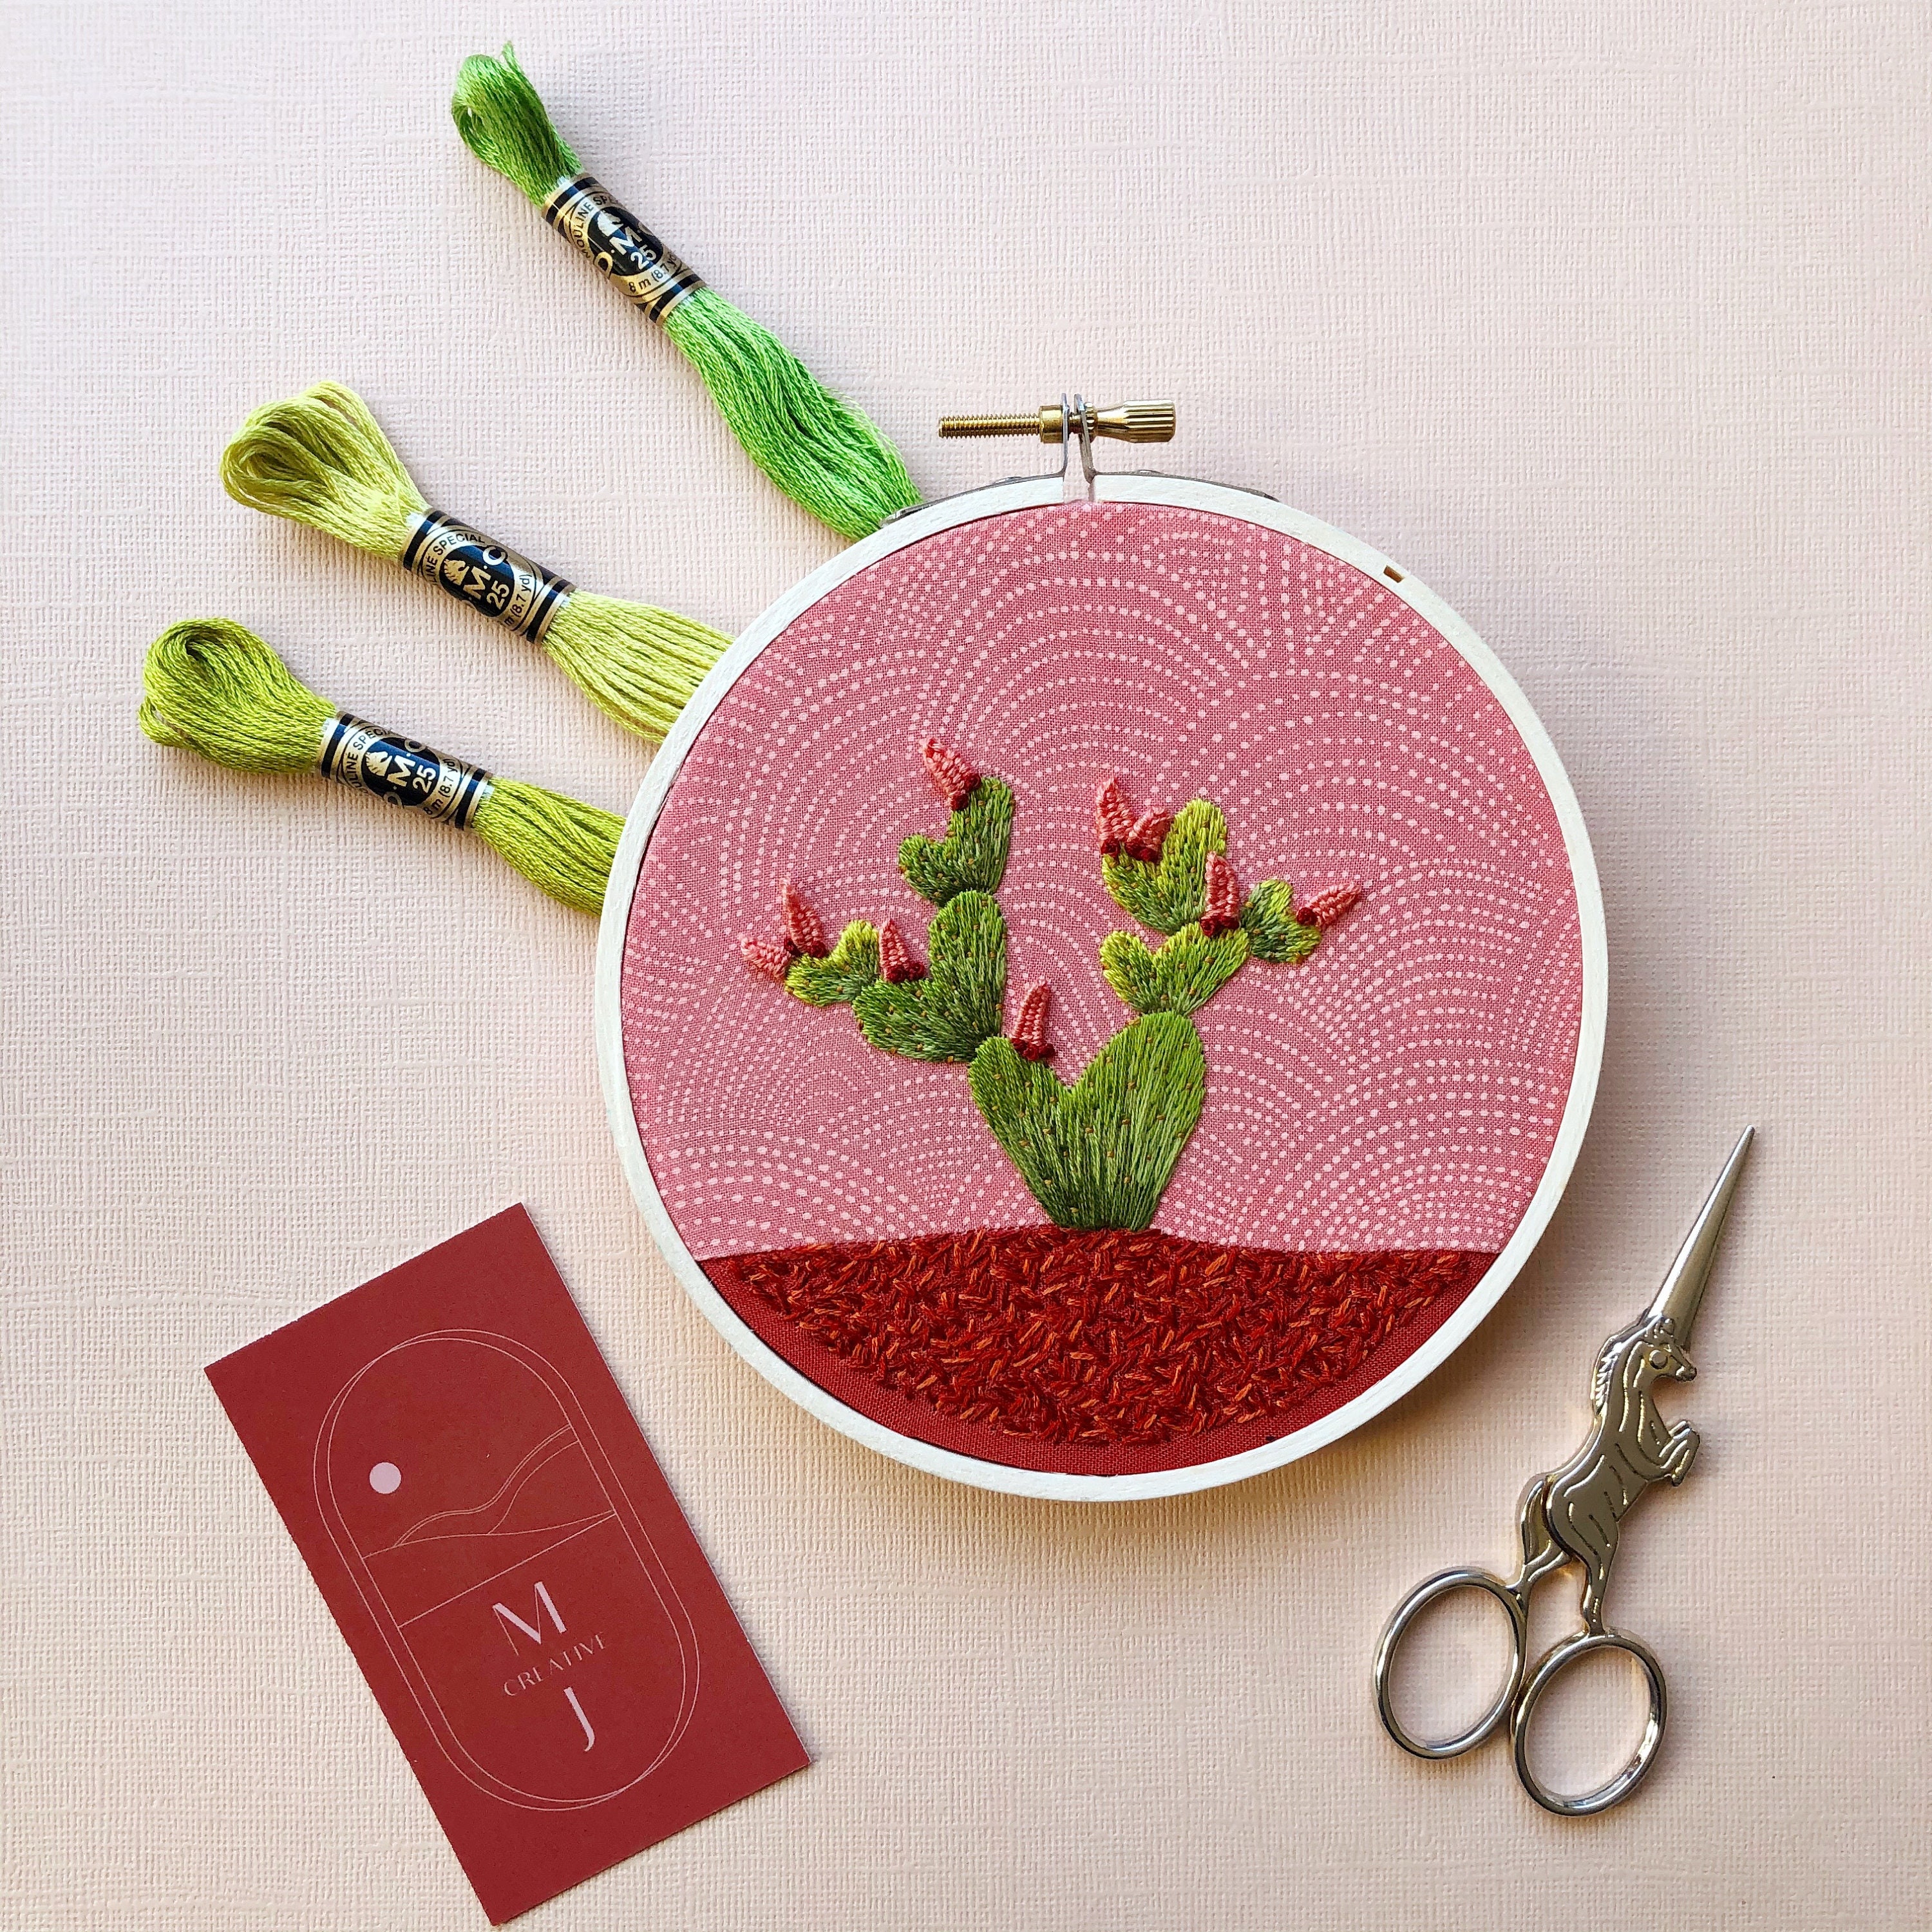 Mcreativej Cacti - Peel Stick and Stitch Hand Embroidery Patterns